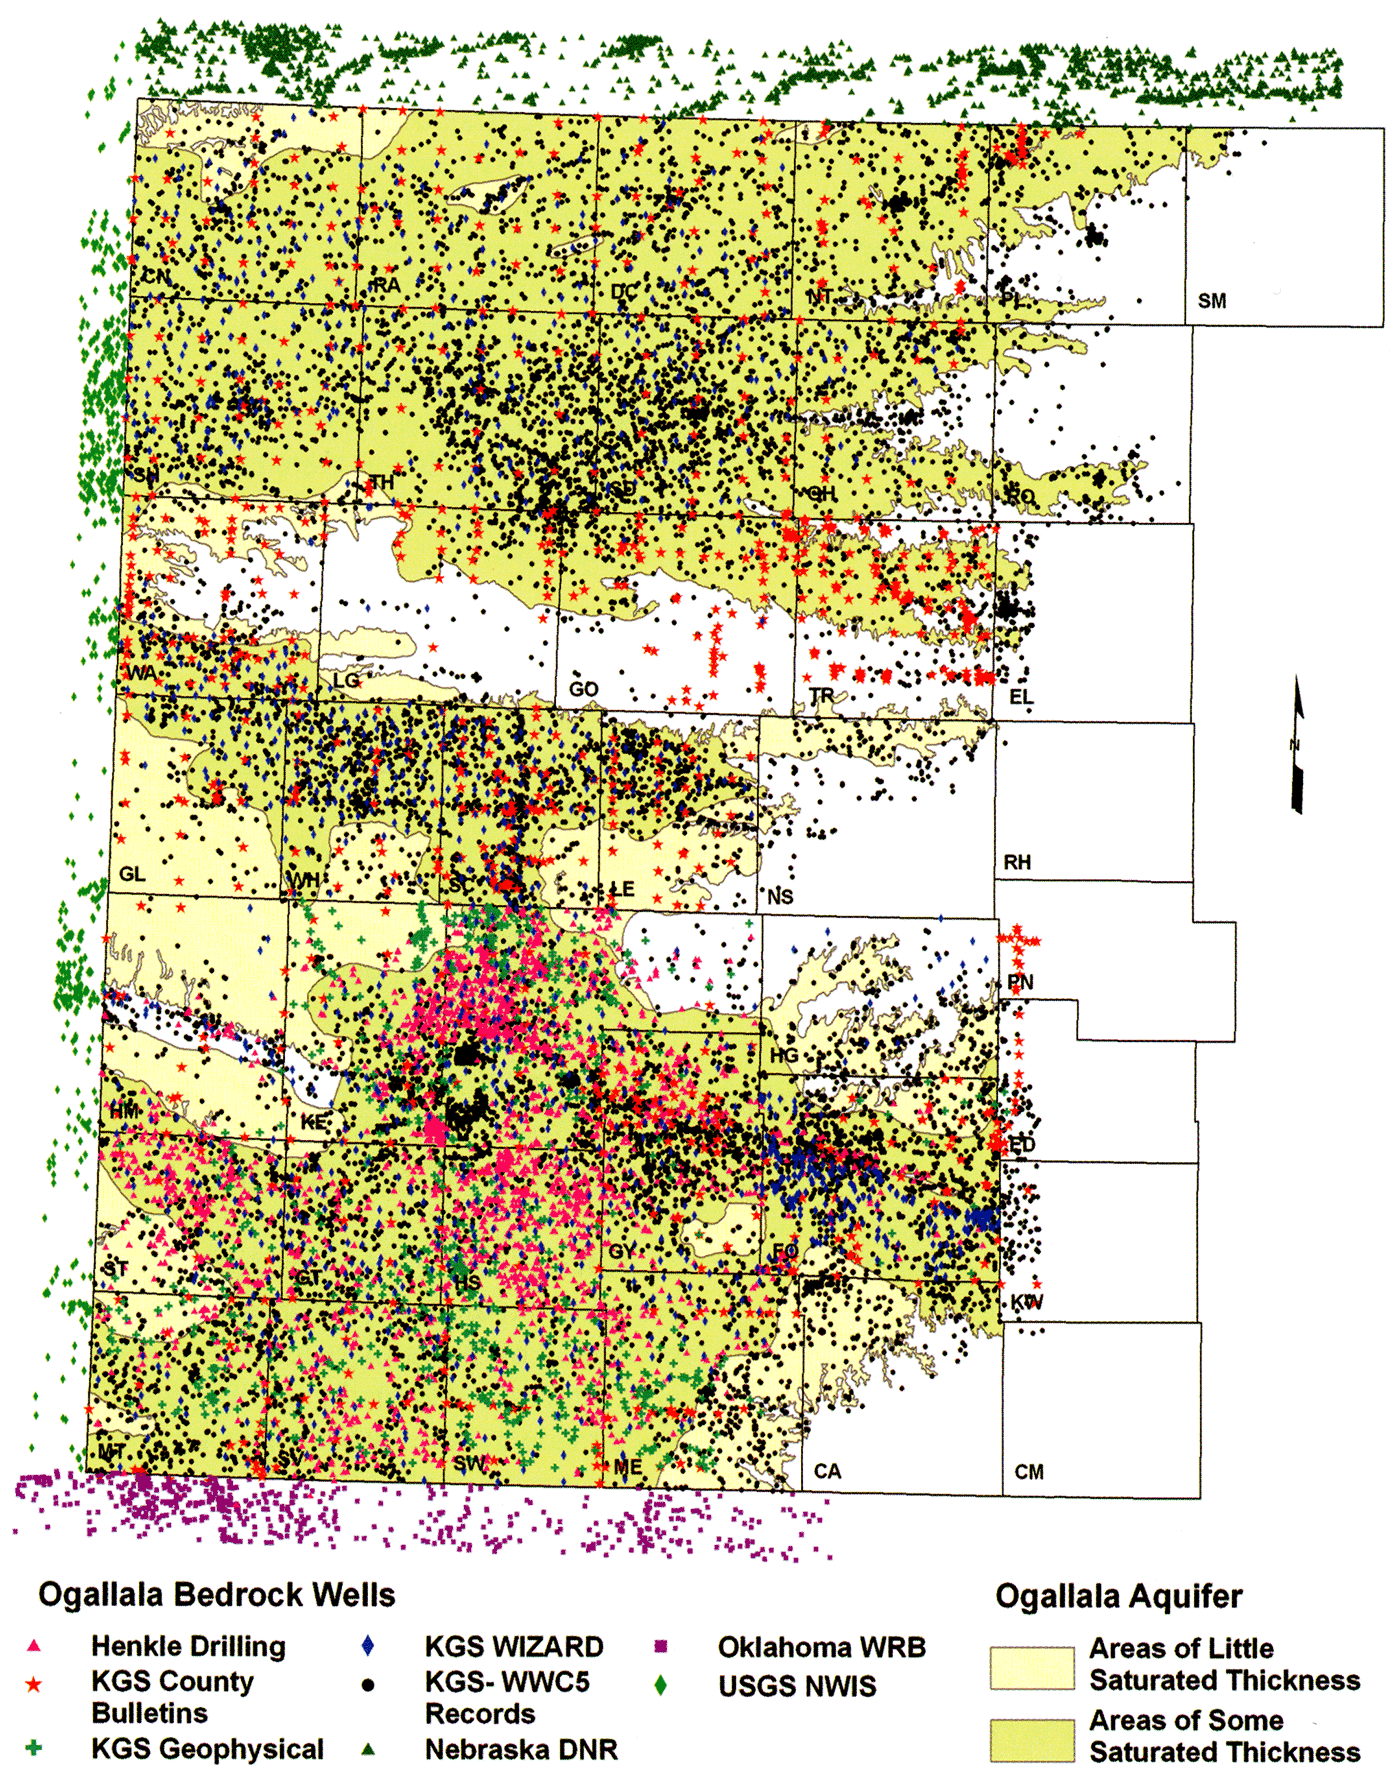 Distribution and type of data used to map the elevation of the bedrock surface beneath the Ogallala aquifer in western Kansas.